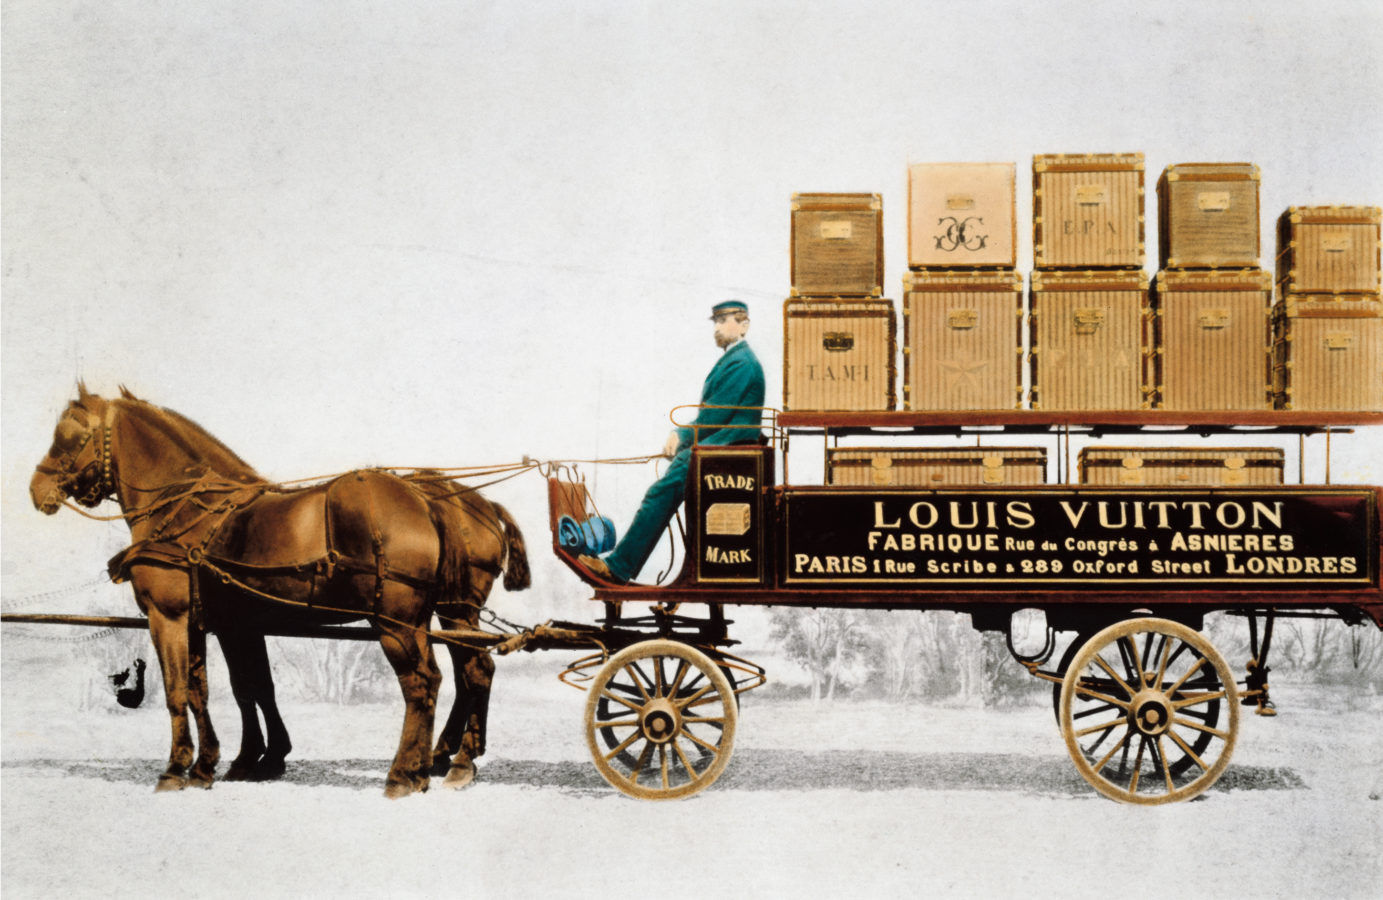 Louis Vuitton: How it transformed from trunk maker to luxury fashion house